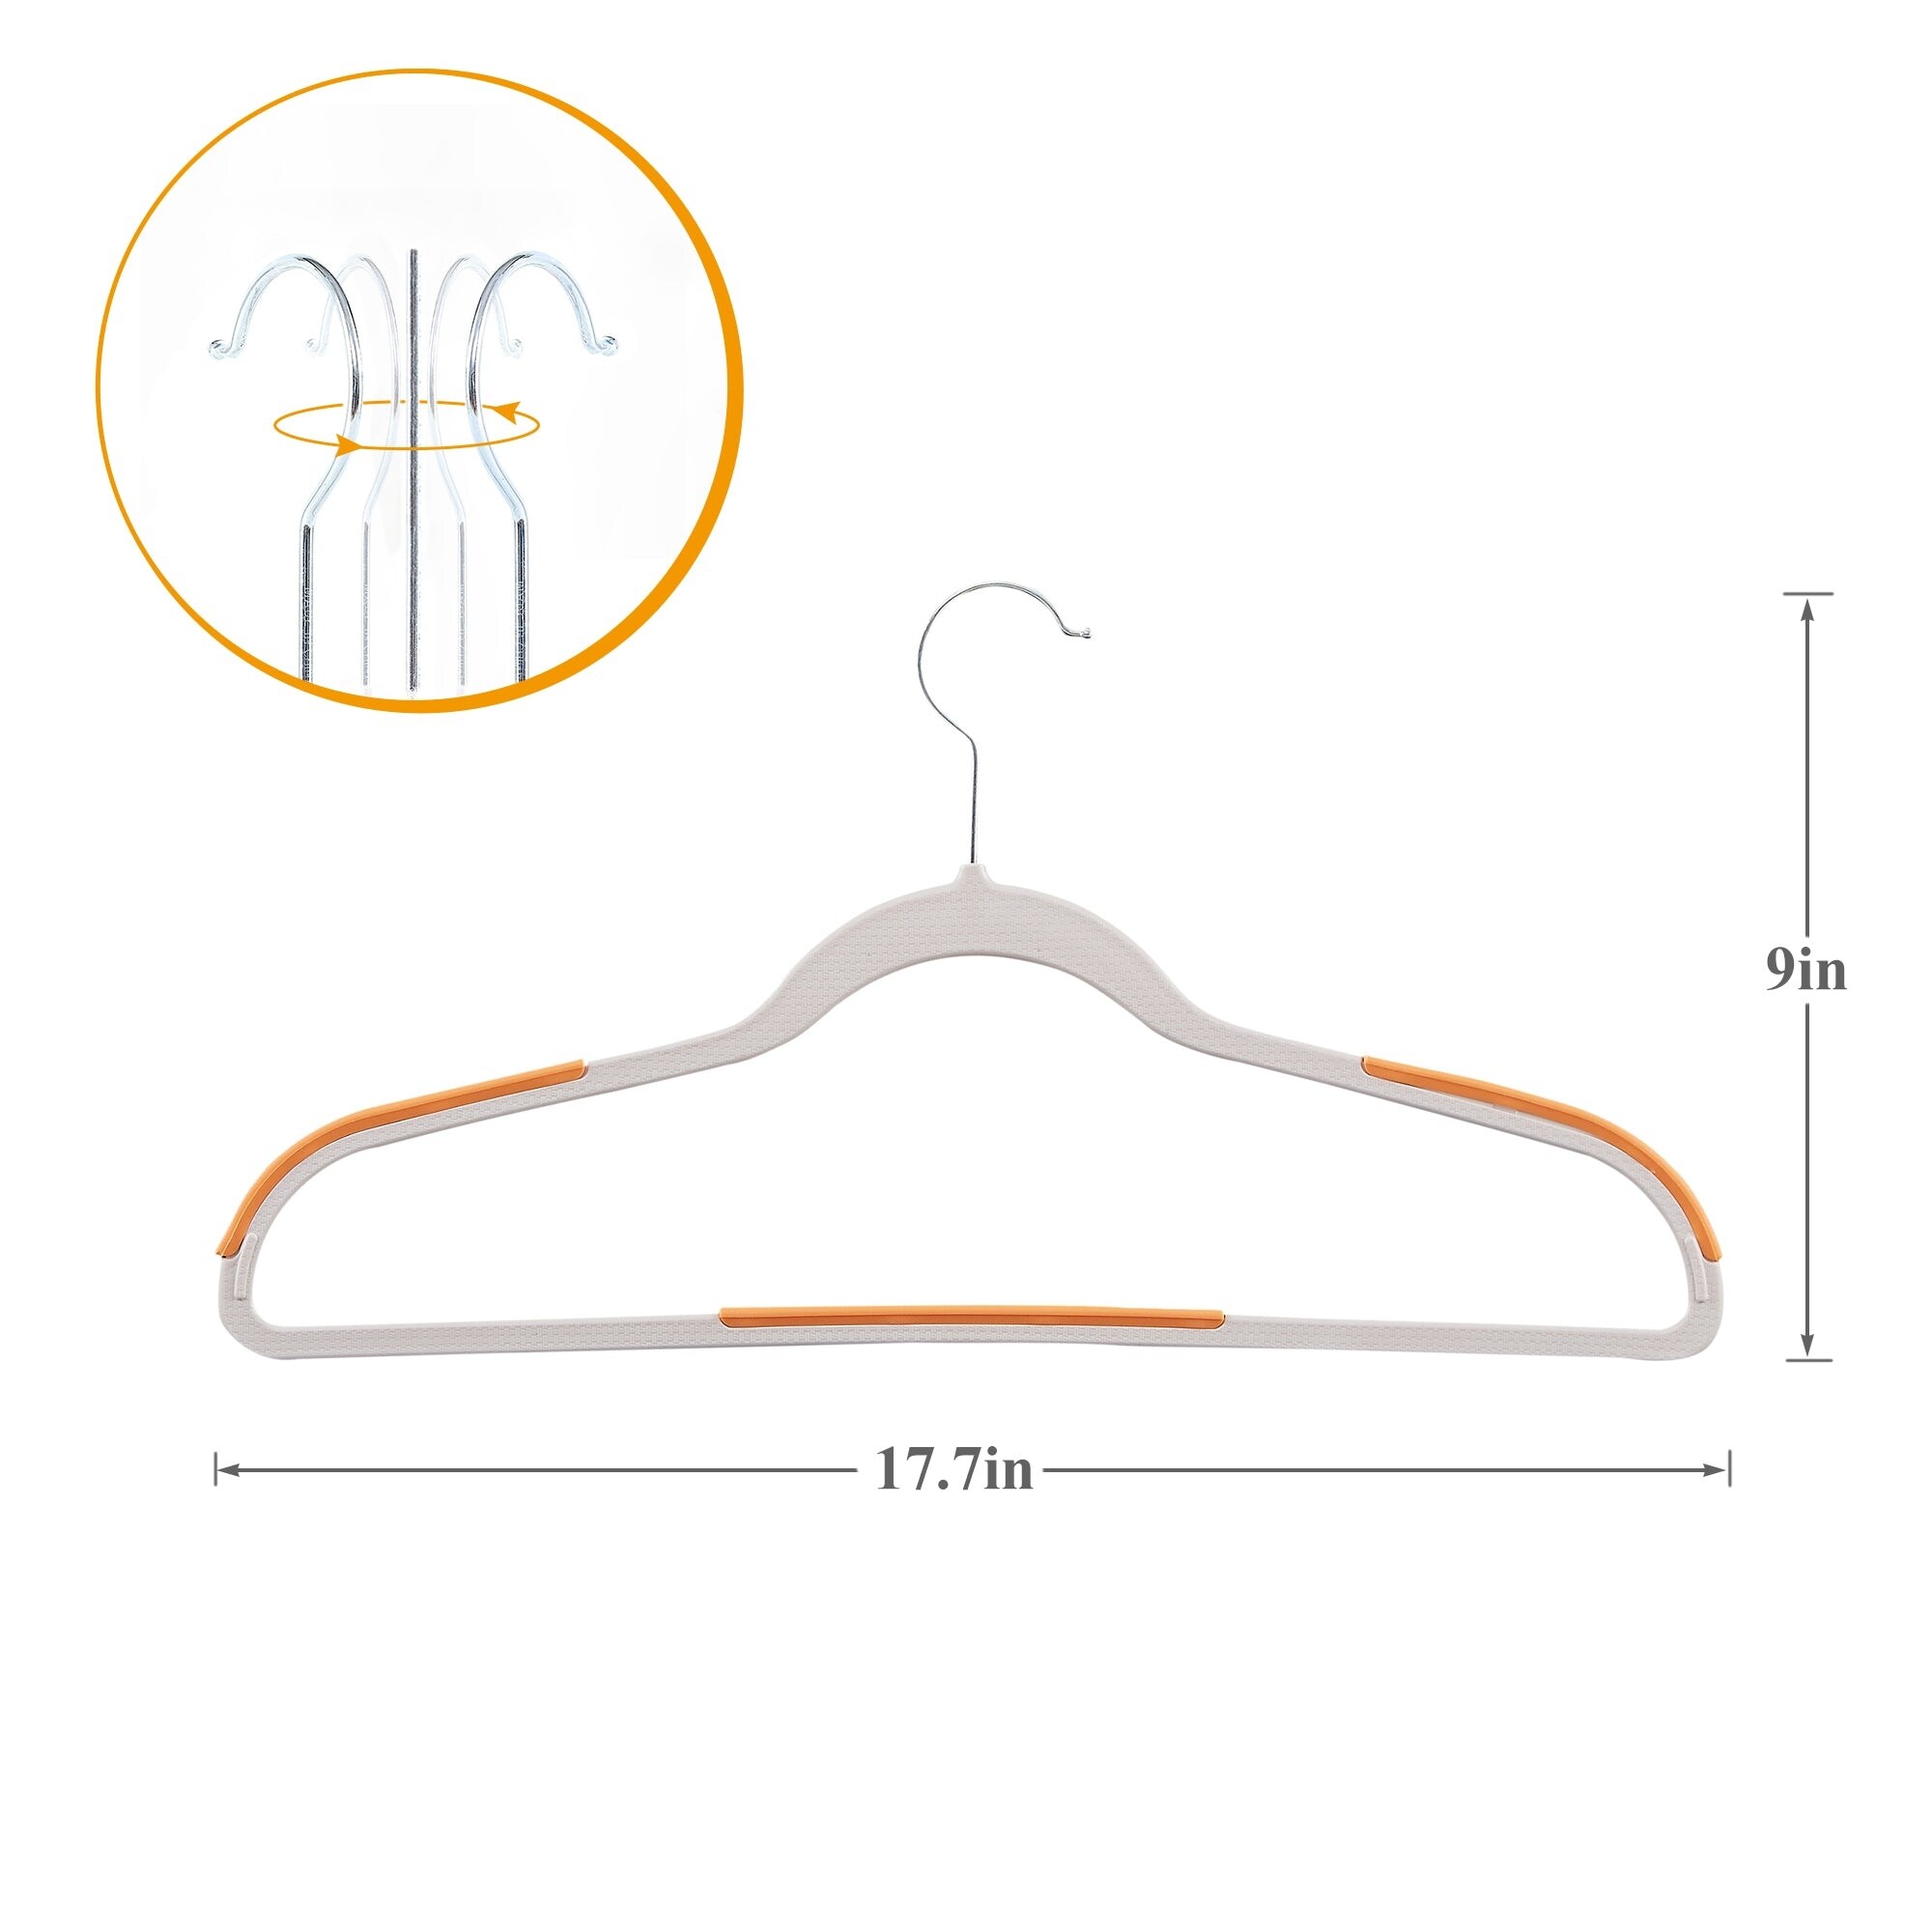 https://ak1.ostkcdn.com/images/products/is/images/direct/0a7e0b1278605d8840e648ab13b9780125e2e216/VECELO-Wet-and-Dry-Adult-Hangers-Holds-Up-To-10-Lbs%2C-Clothes-Hangers%2825-50-Packs-Option%29.jpg